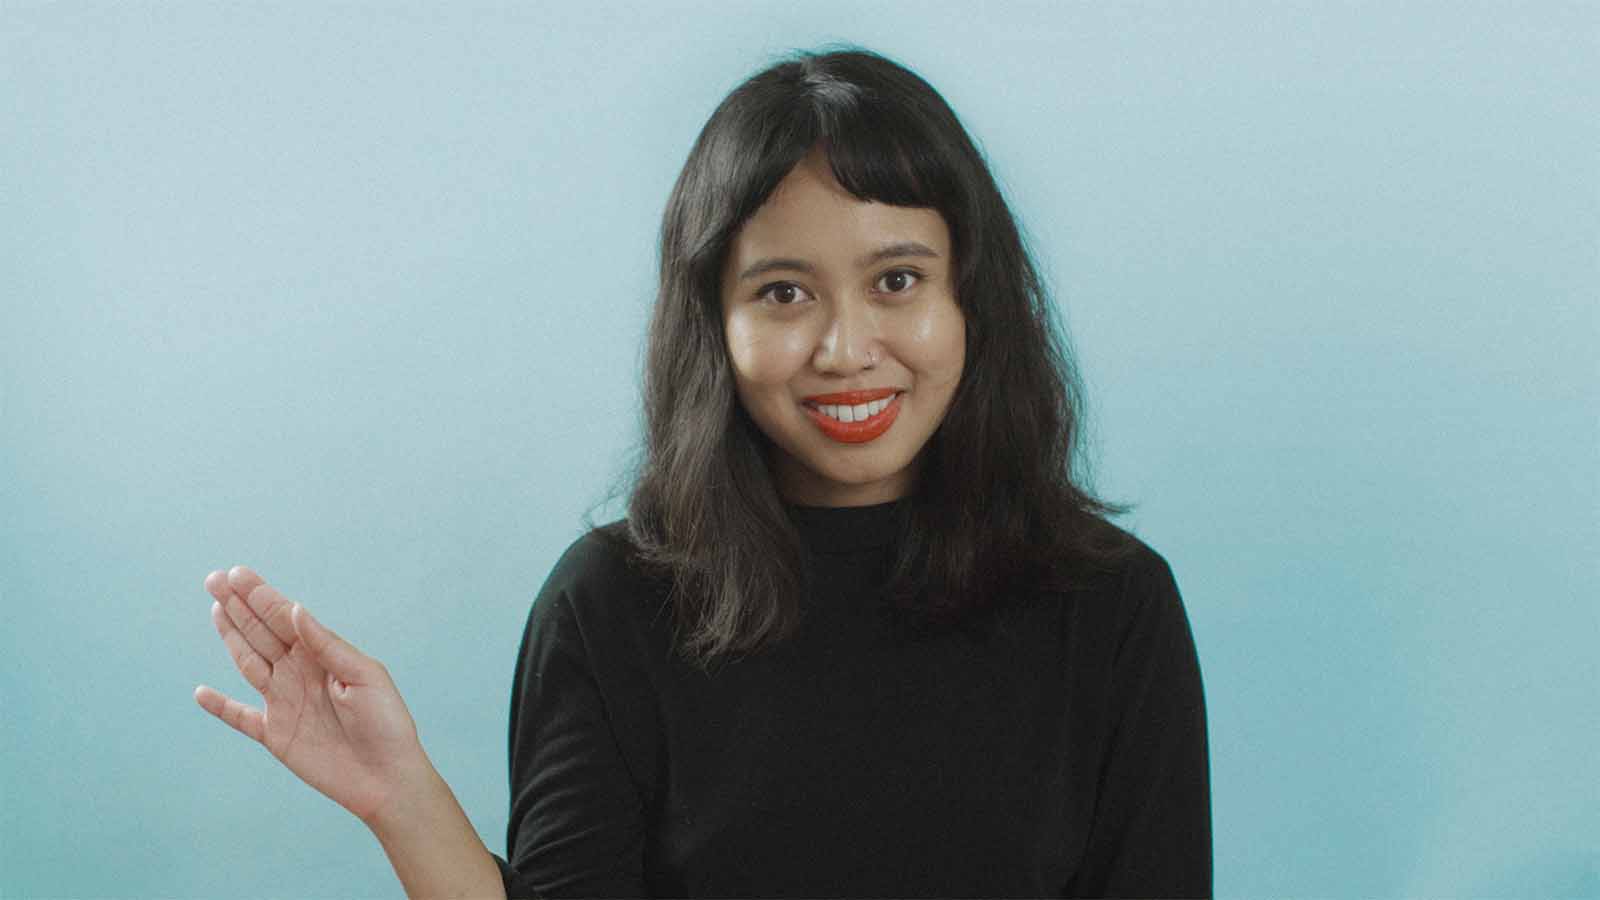 'Learning Tagalog with Kayla' looks like any old language tutorial, but the four minute short film will take you on a journey. Here's why you need to watch.